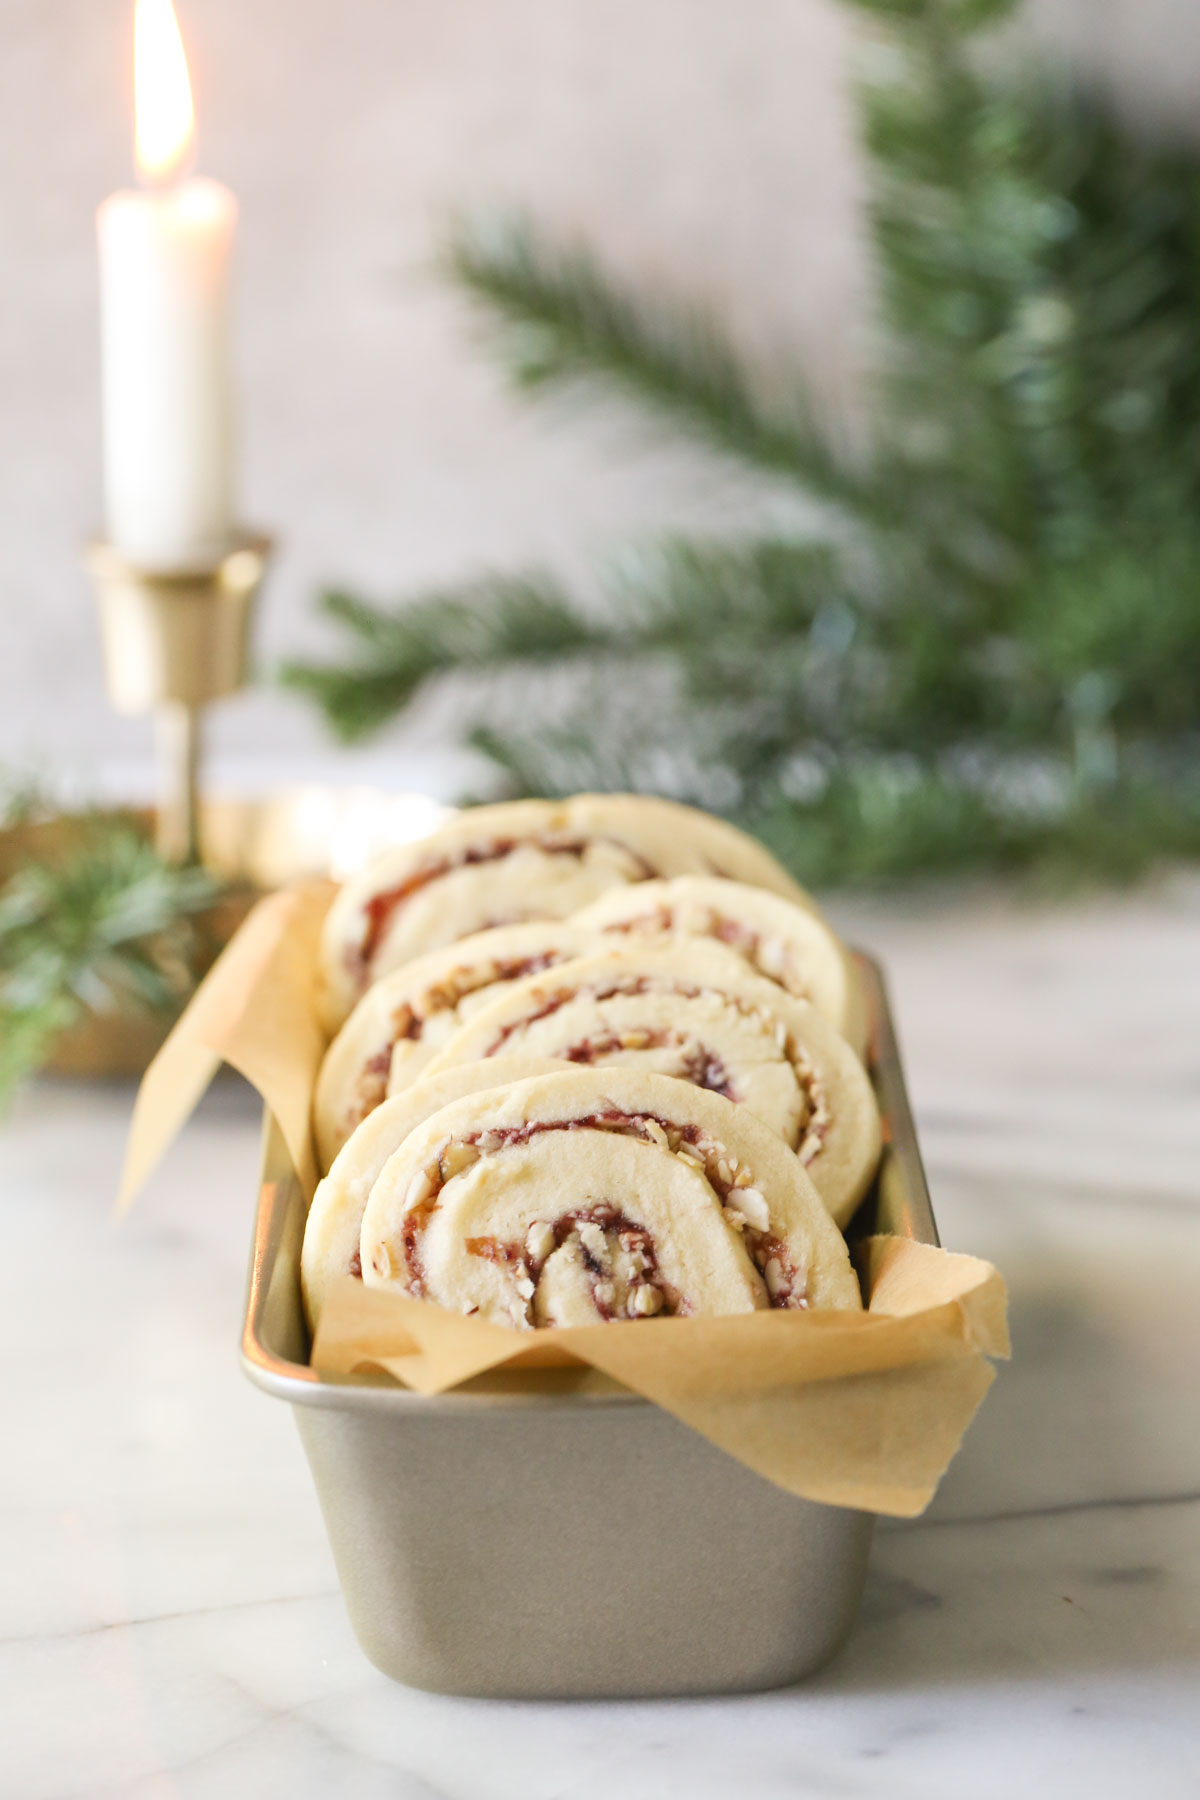 Raspberry Almond Pinwheels arranged in a parchment paper lined mini loaf pan, with a candle and greenery in the background.  